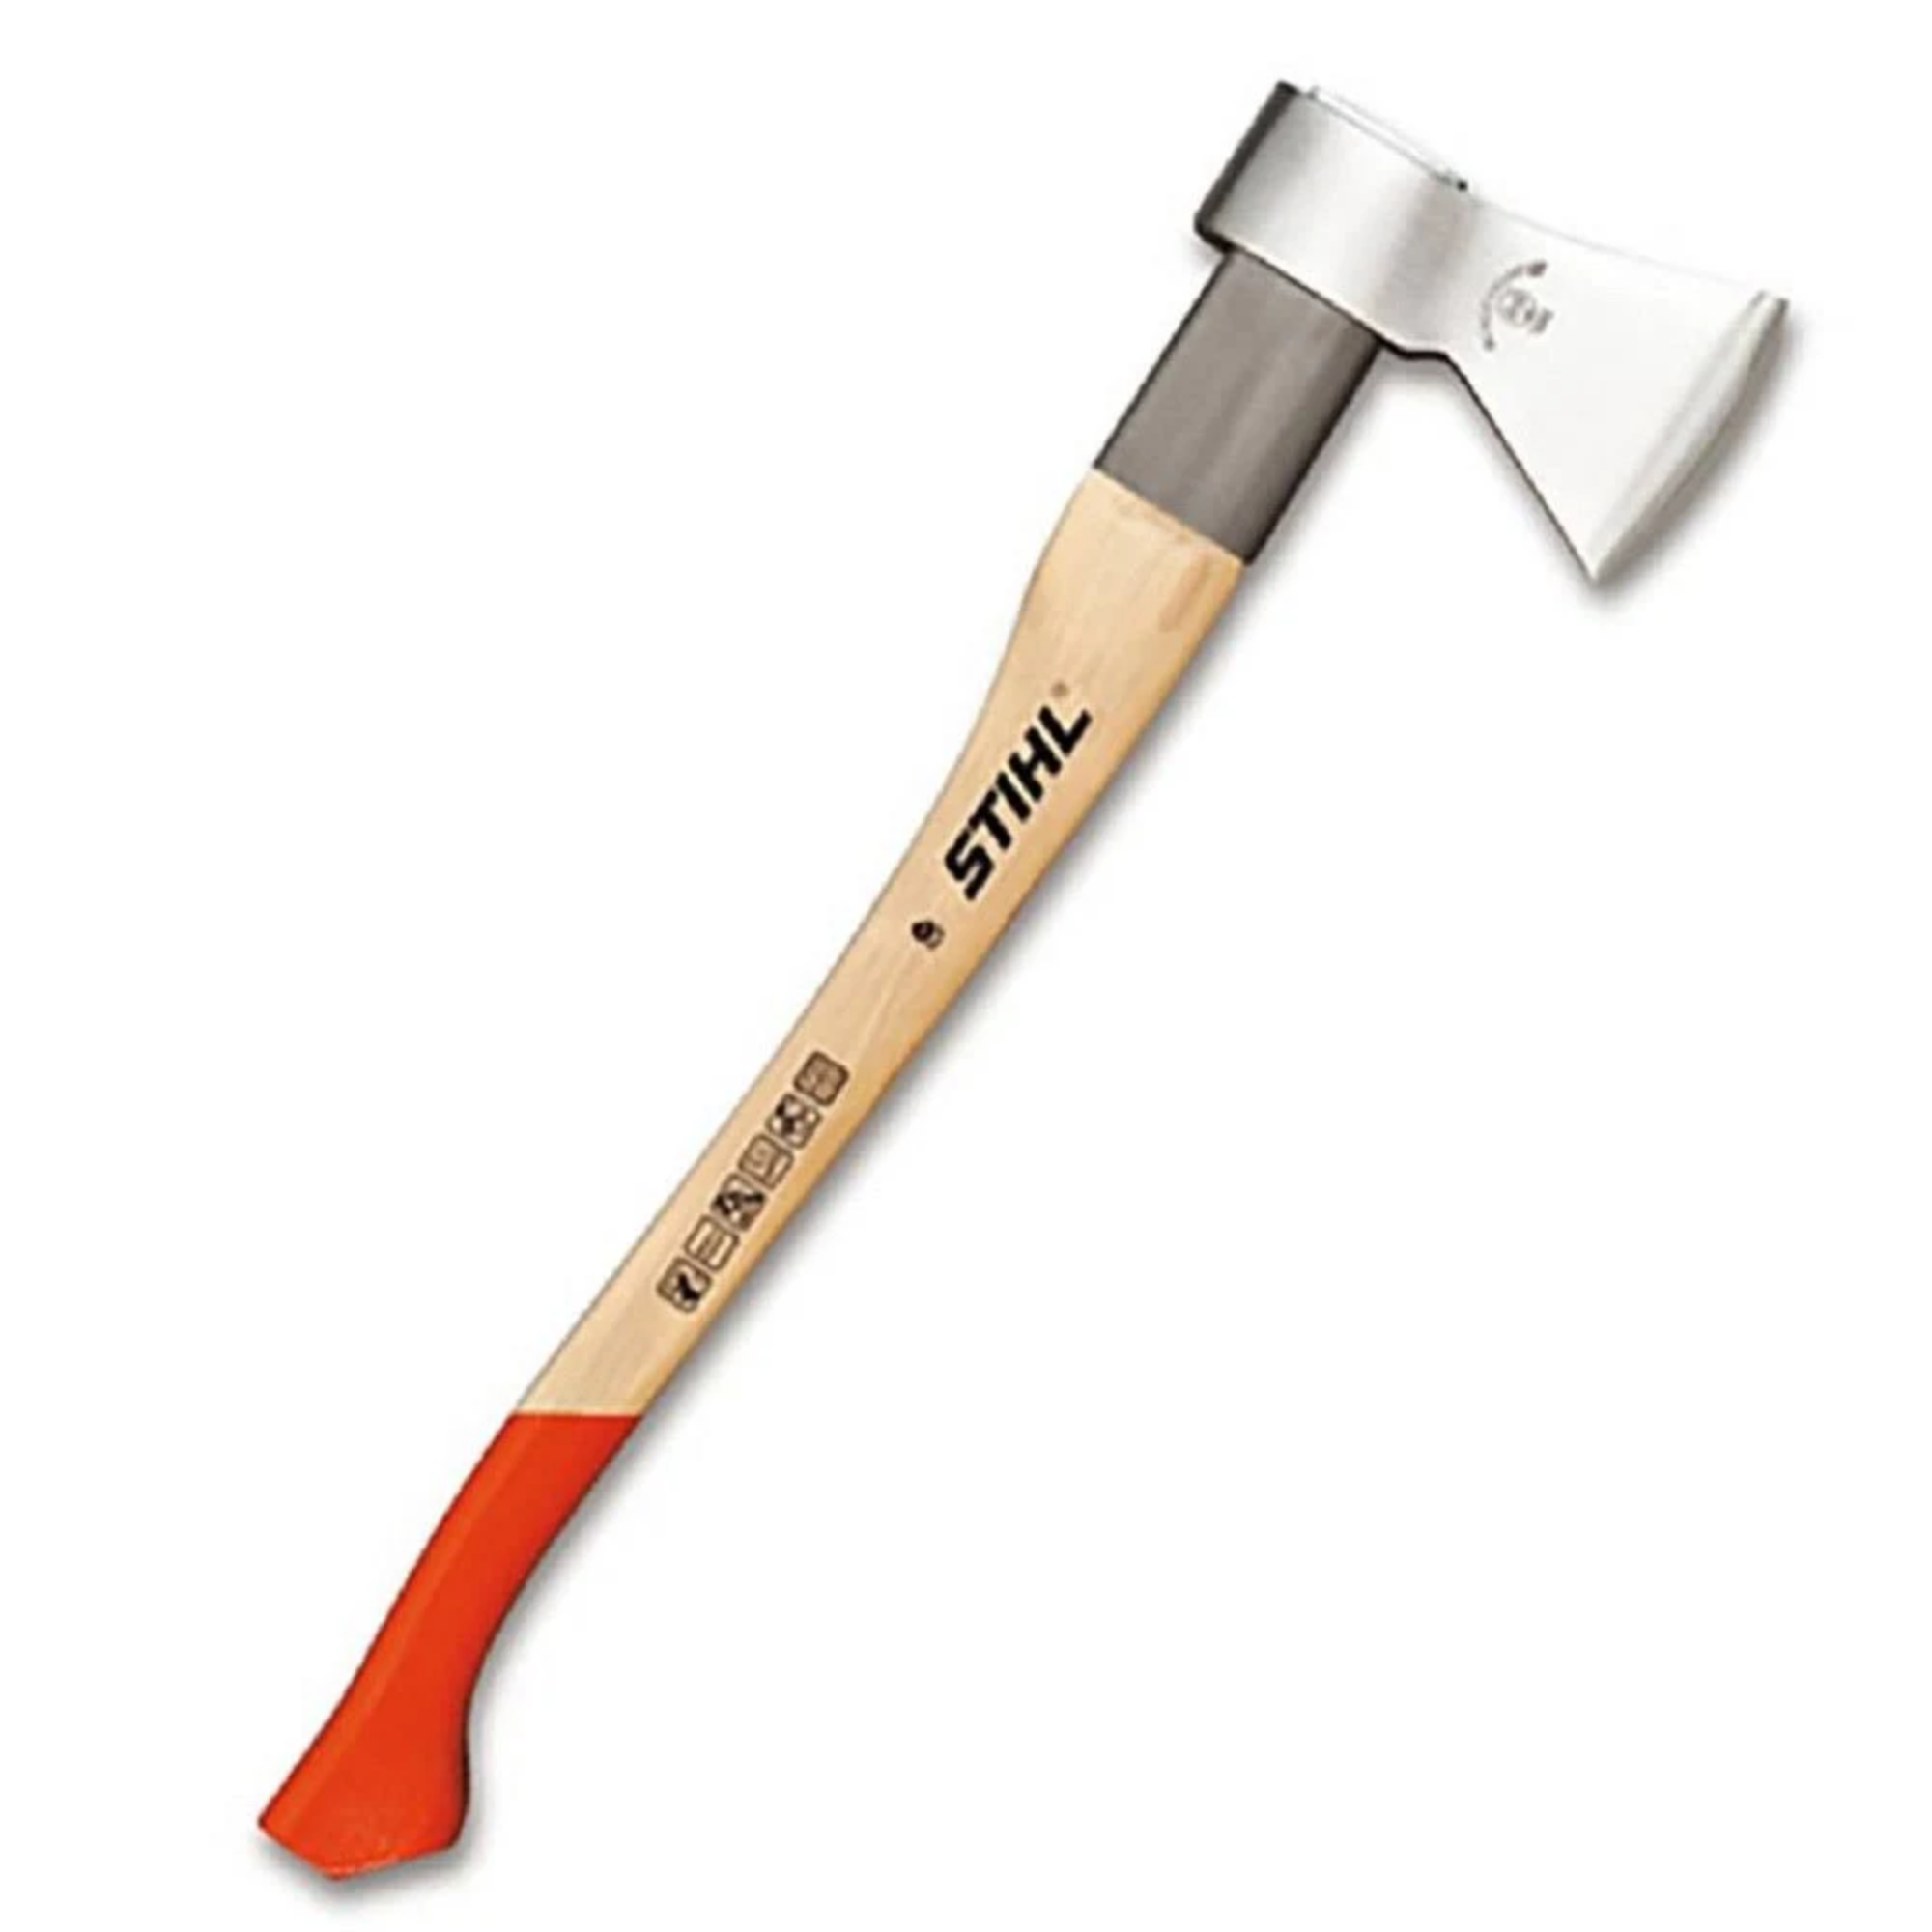 Stihl Pro Forestry Axe | 7010 881 1905